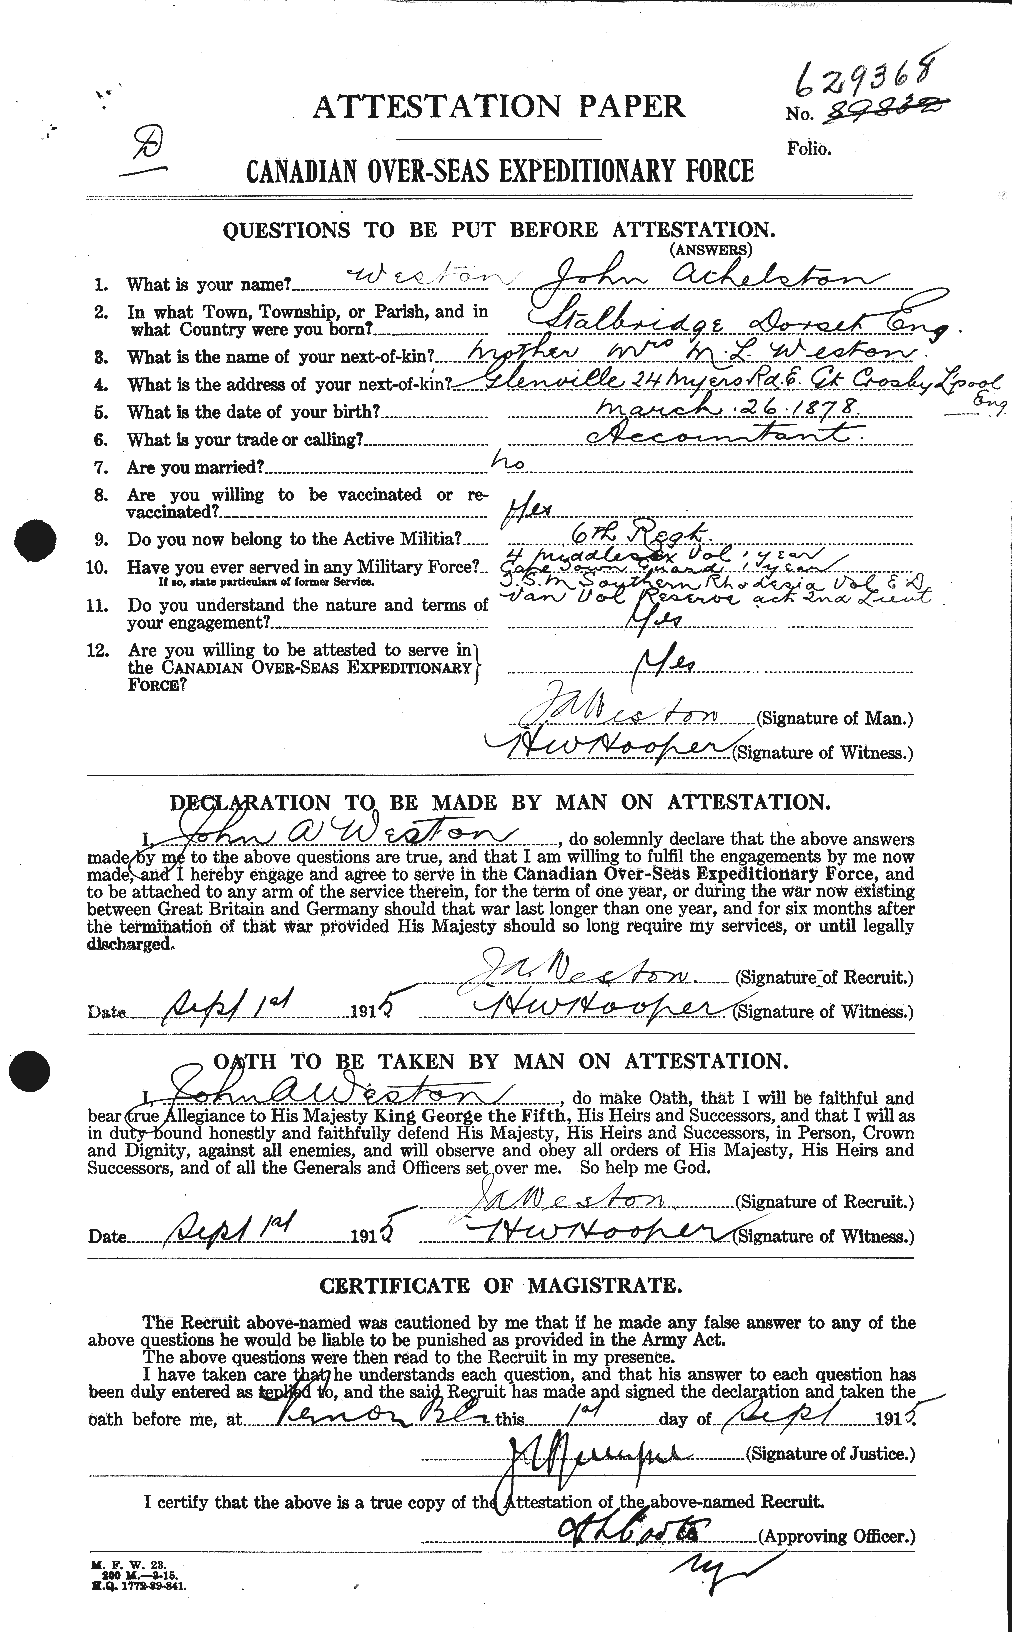 Personnel Records of the First World War - CEF 665770a